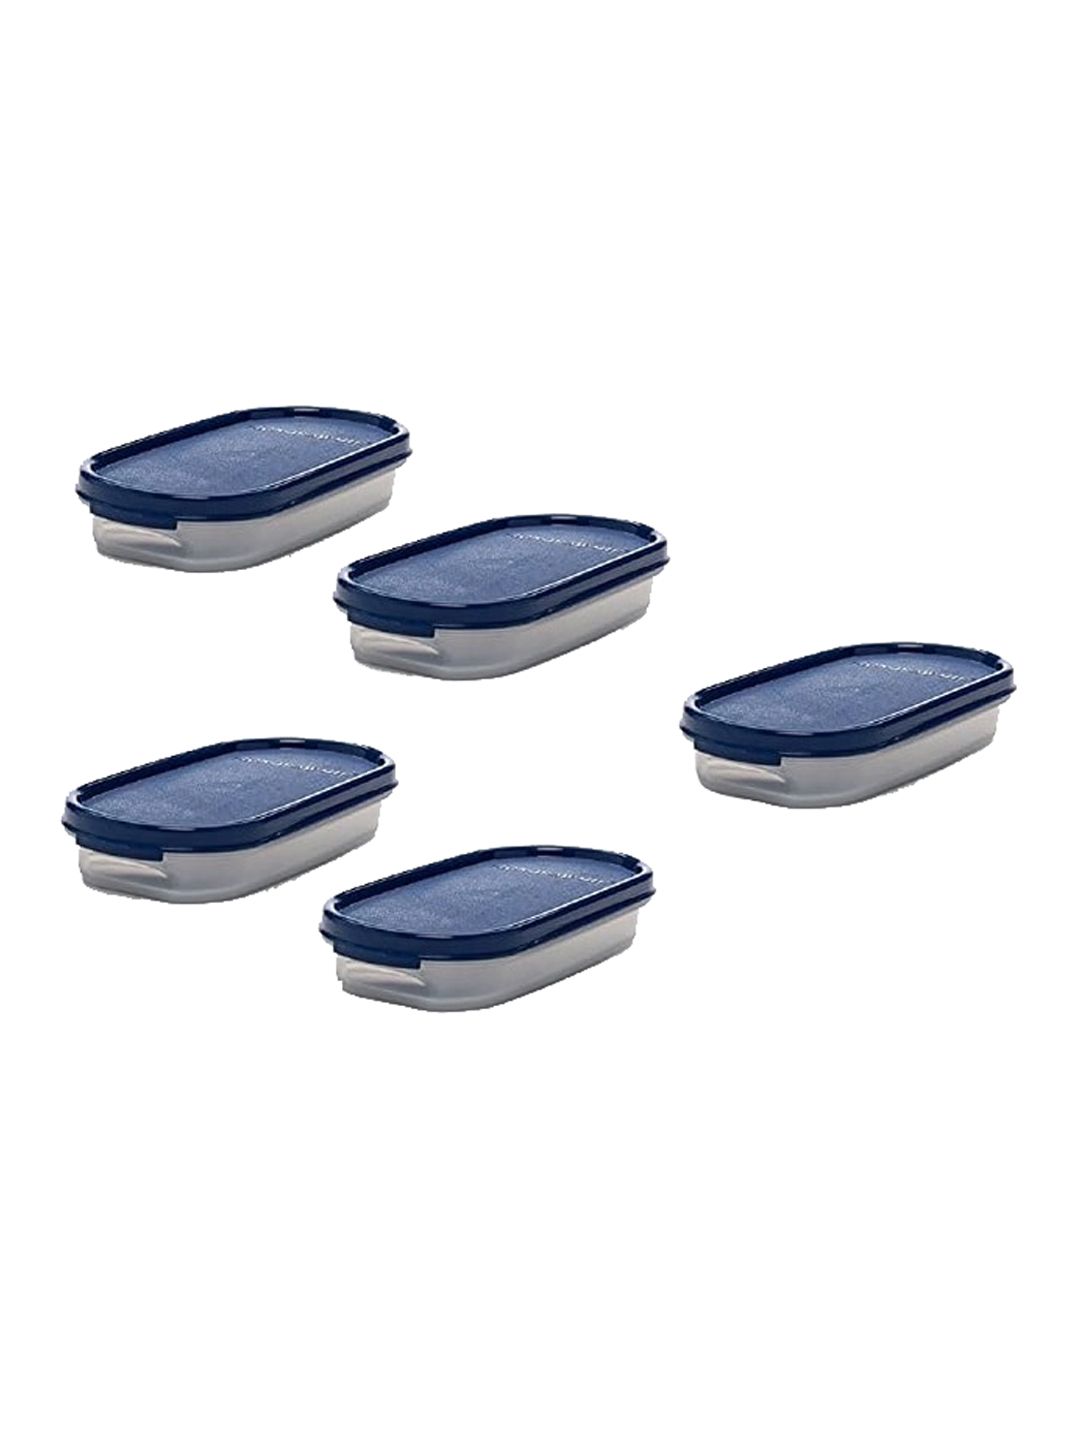 SignoraWare Set of 5 Blue & Transparent Solid Oval Food Containers Price in India